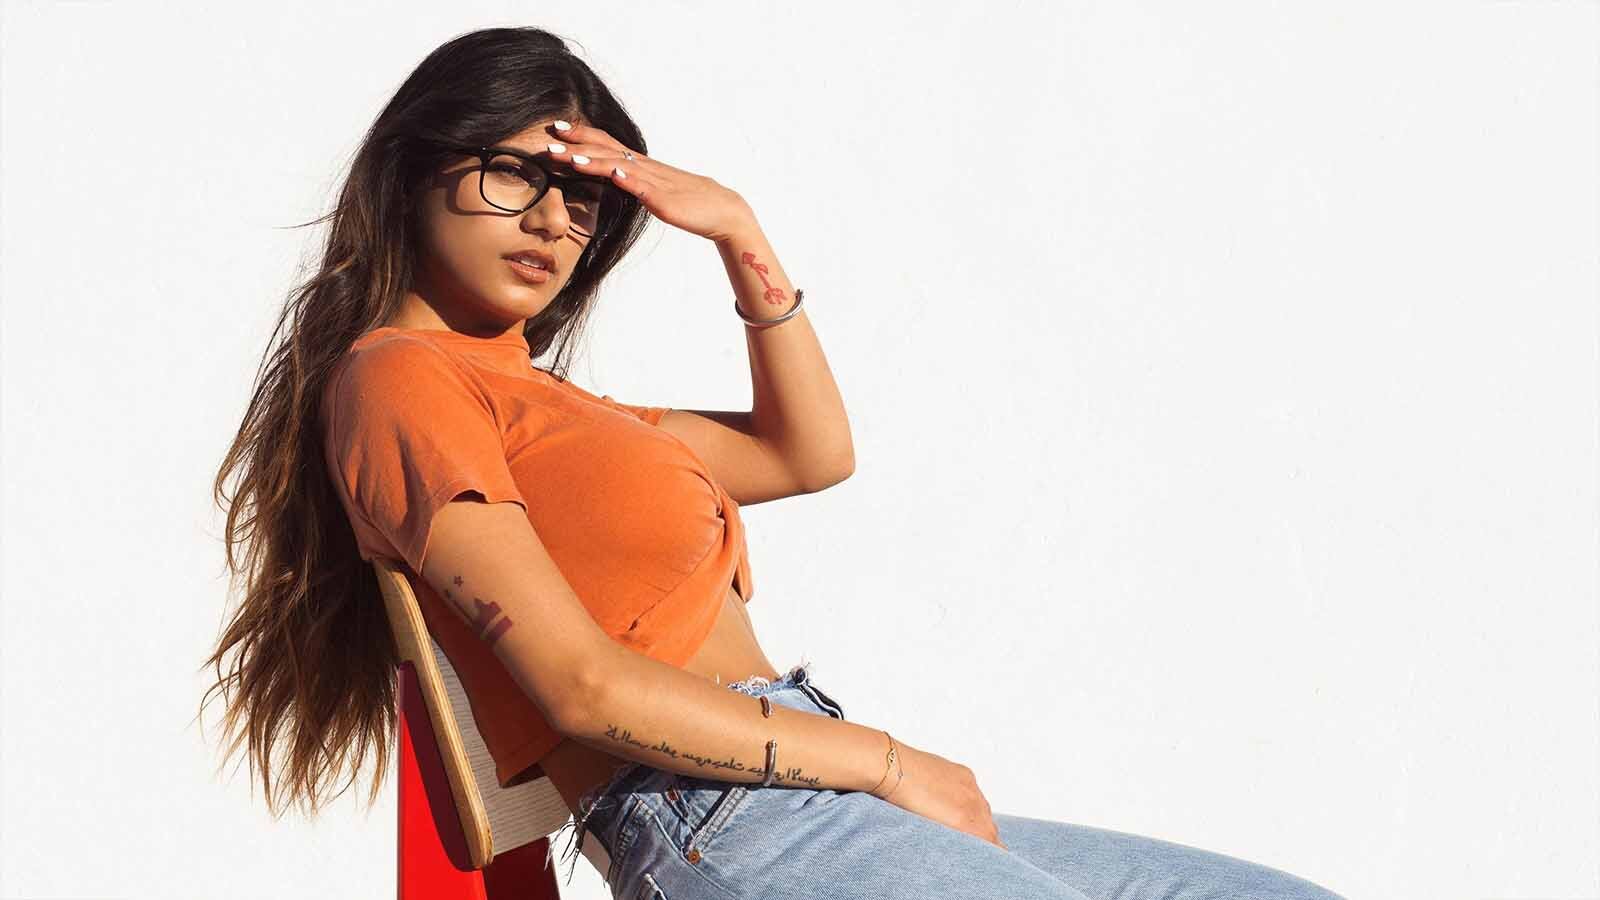 Mia Khalifa quotes: Inspire yourself with these great sayings â€“ Film Daily